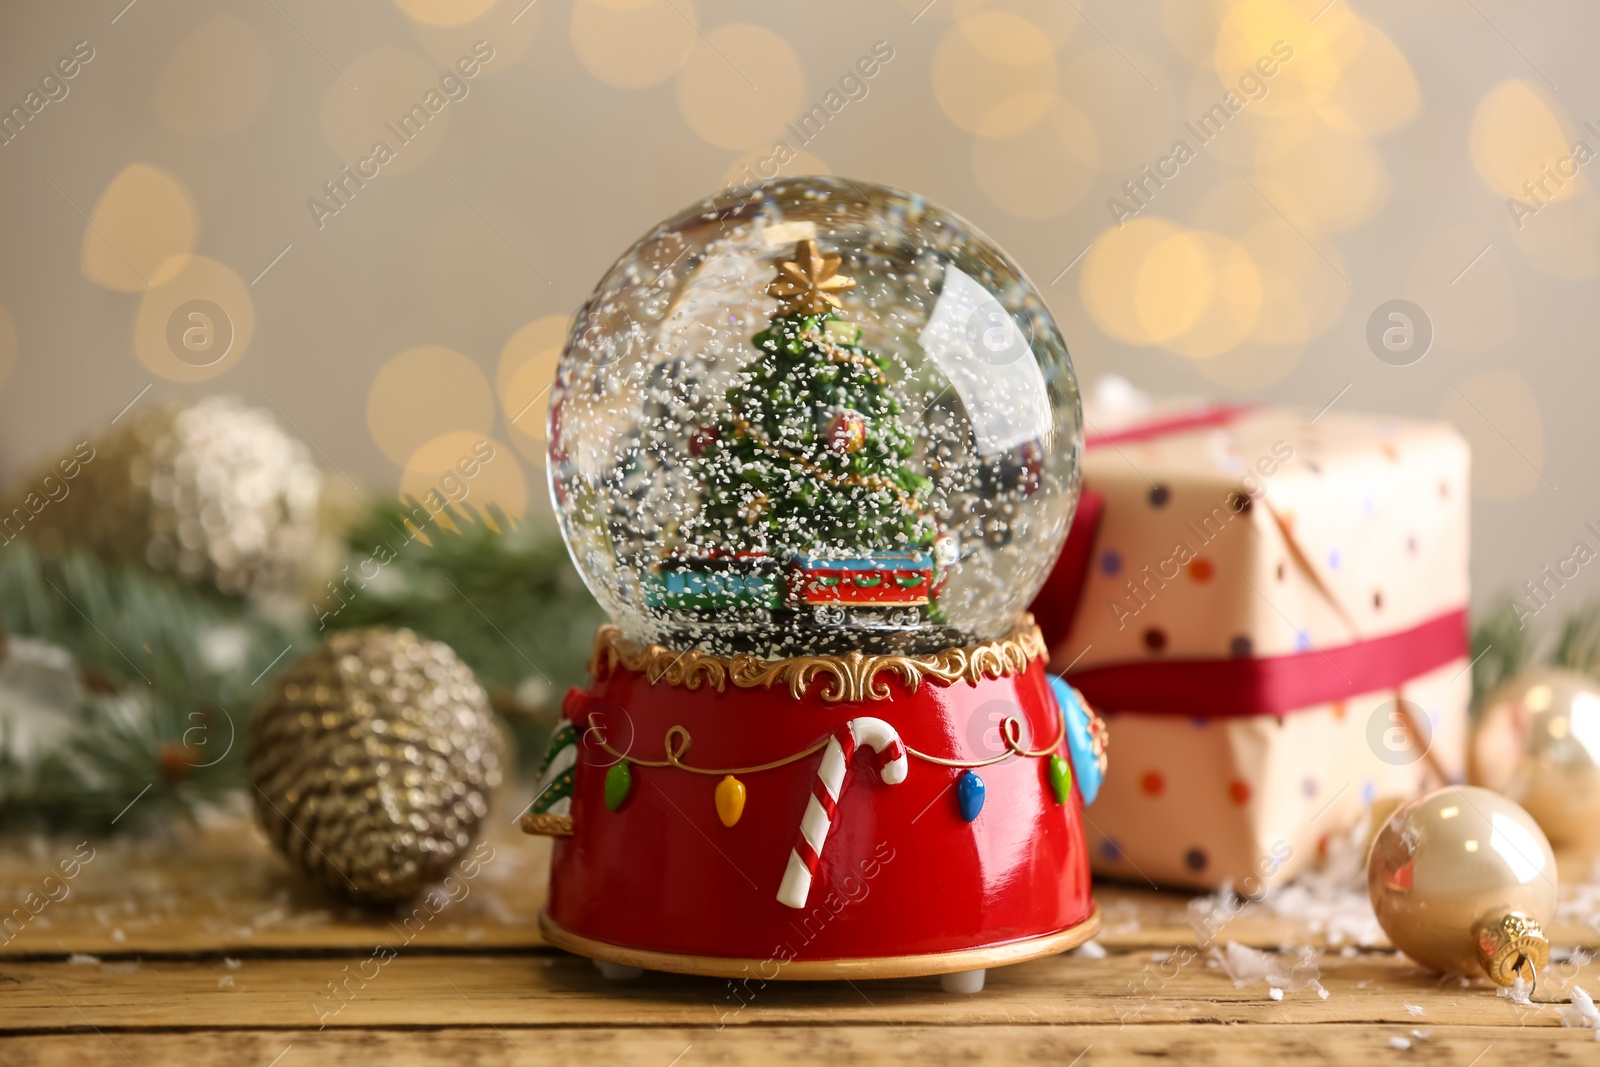 Photo of Beautiful snow globe with Christmas tree on wooden table against blurred festive lights